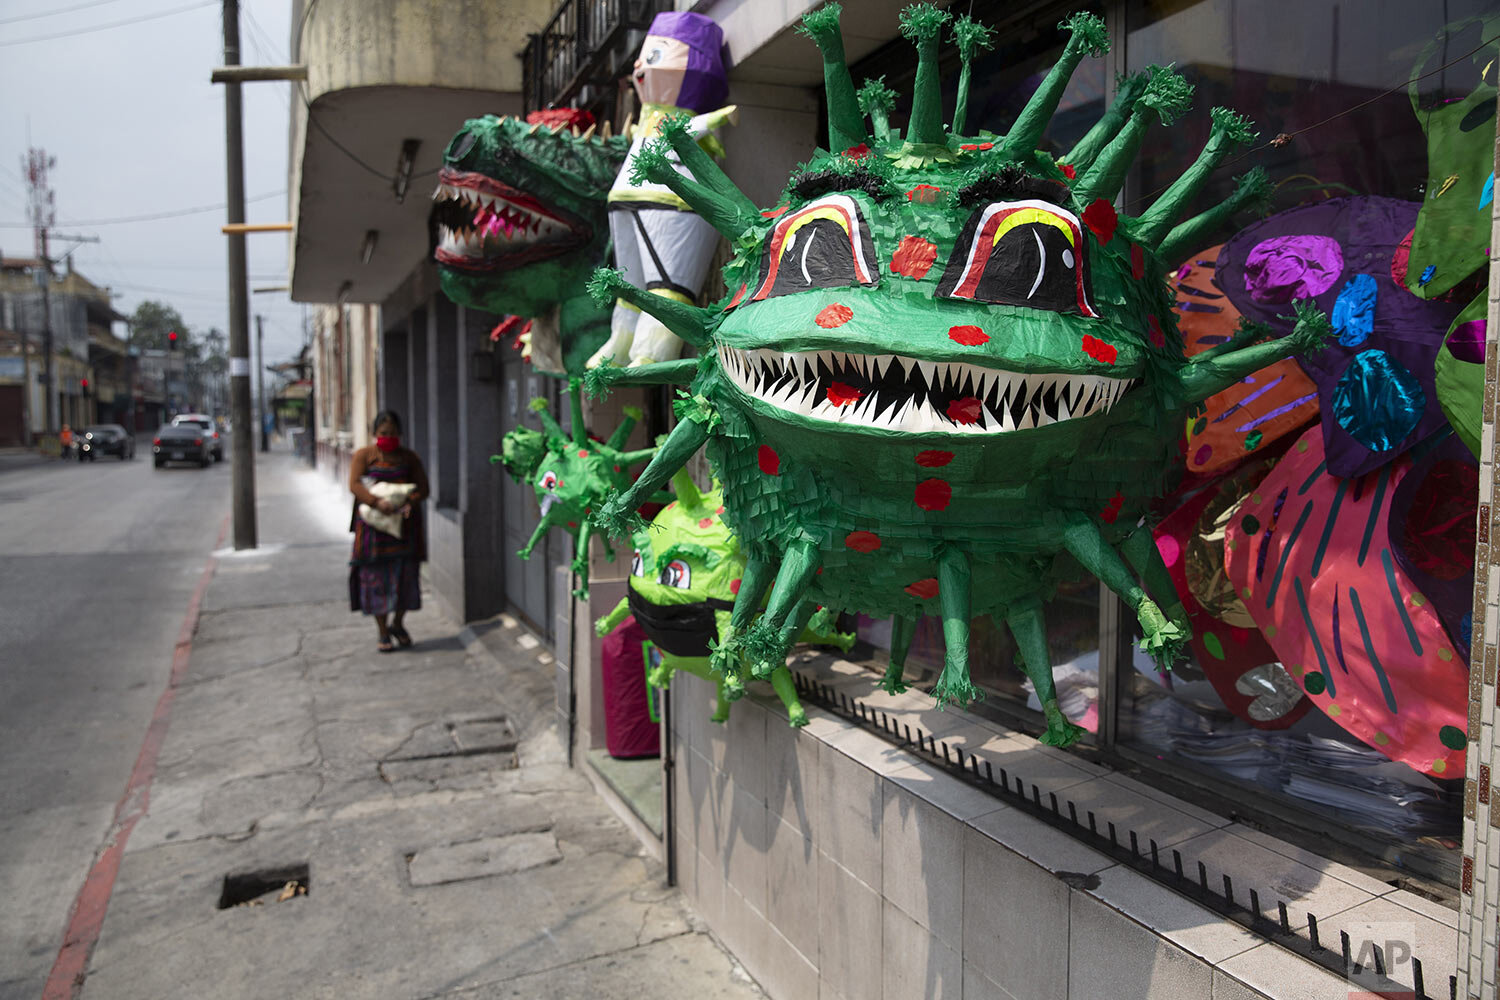  Piñatas depicting the new coronavirus are displayed in a store at Colon park in Guatemala City, Tuesday, April 14, 2020. The piñatas sell for about $1.50 depending on the size. (AP Photo/Moises Castillo) 